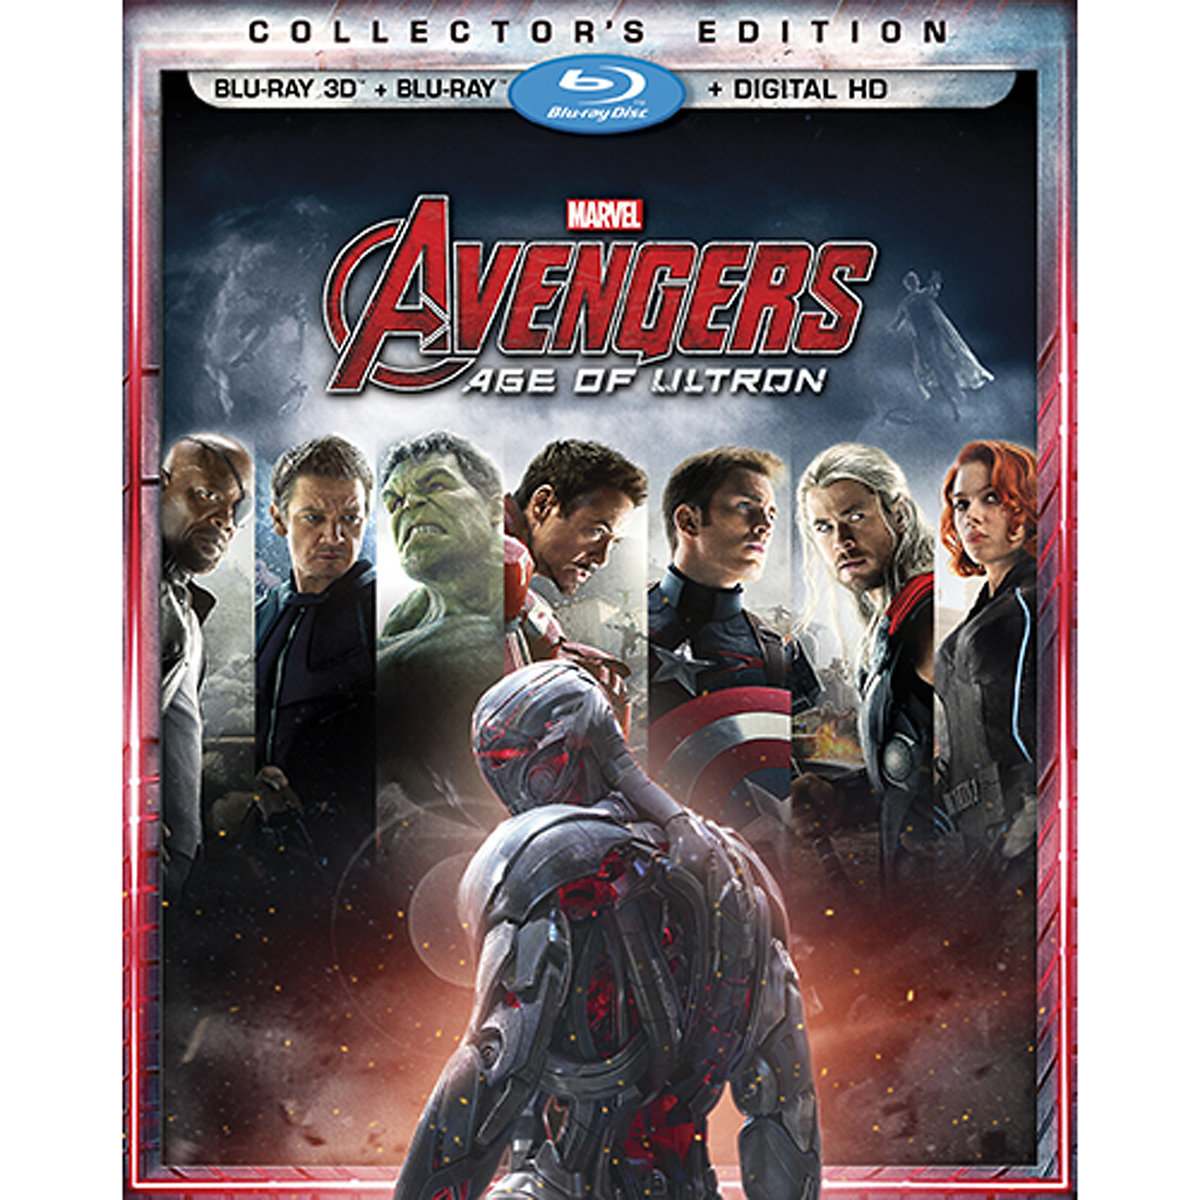 Avengers: Age of Ultron (Collector's Edition) (Blu-ray 3D + Blu-ray + Digital HD) - image 1 of 5